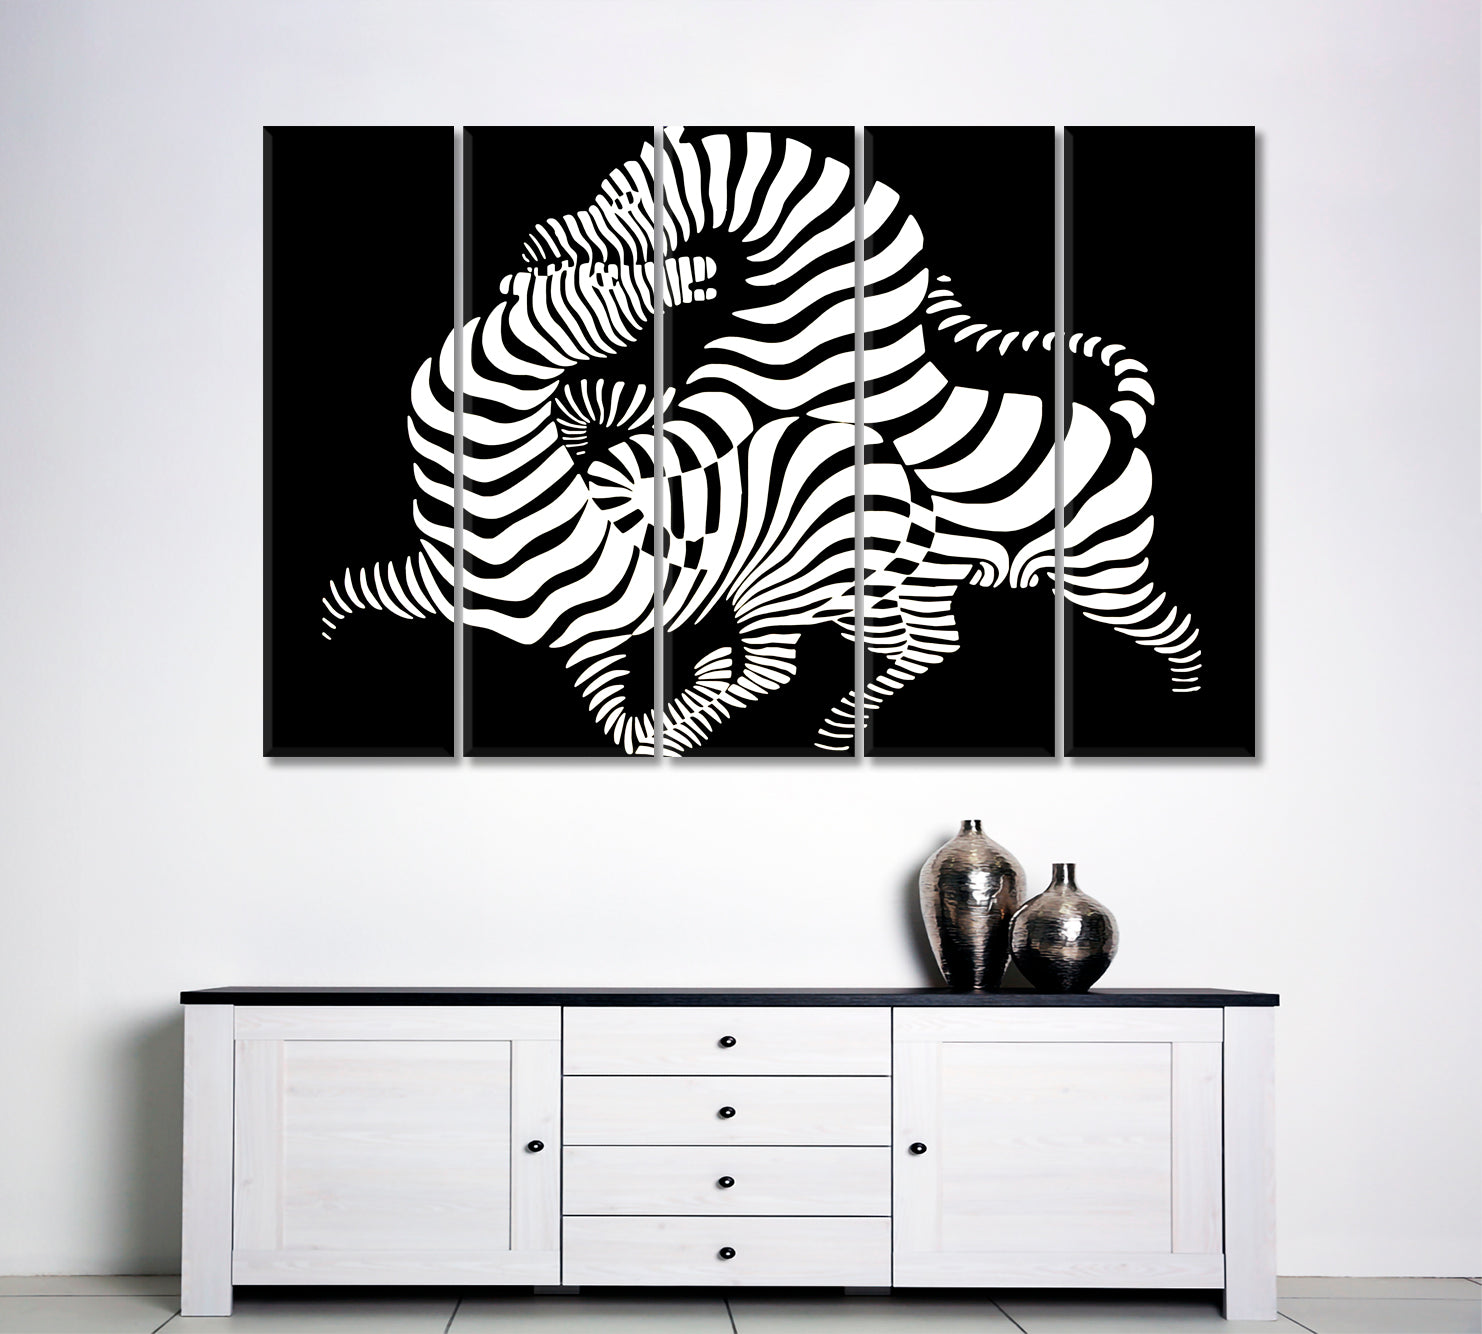 IN LOVE Twisted Zebras Vasarely Style Tricky Optical Illusion Op-art Contemporary Art Artesty 5 panels 36" x 24" 